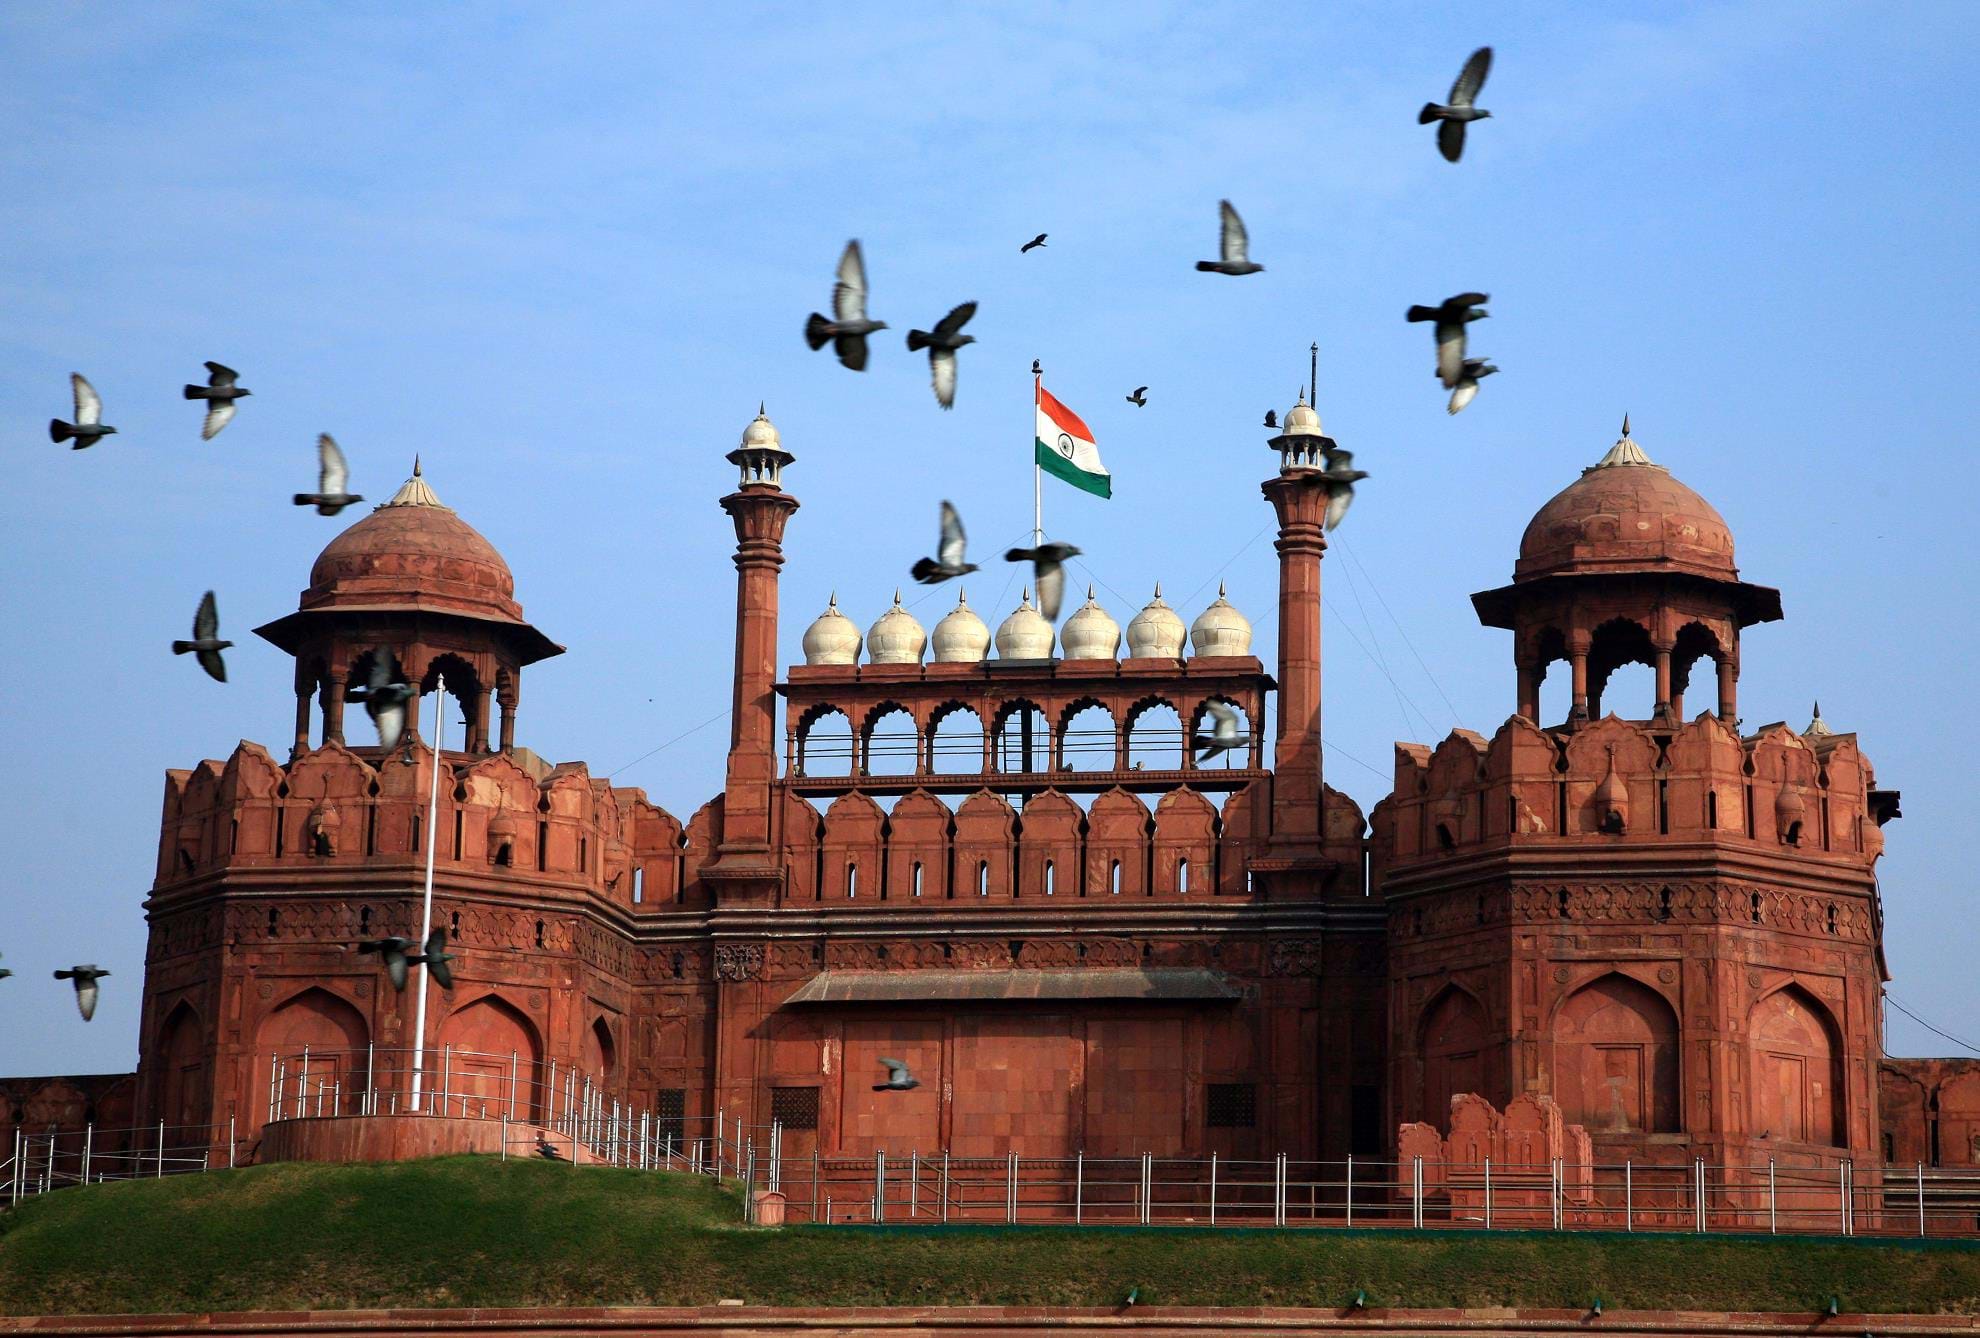 About The Red Fort Complex in Delhi, India | TransIndus